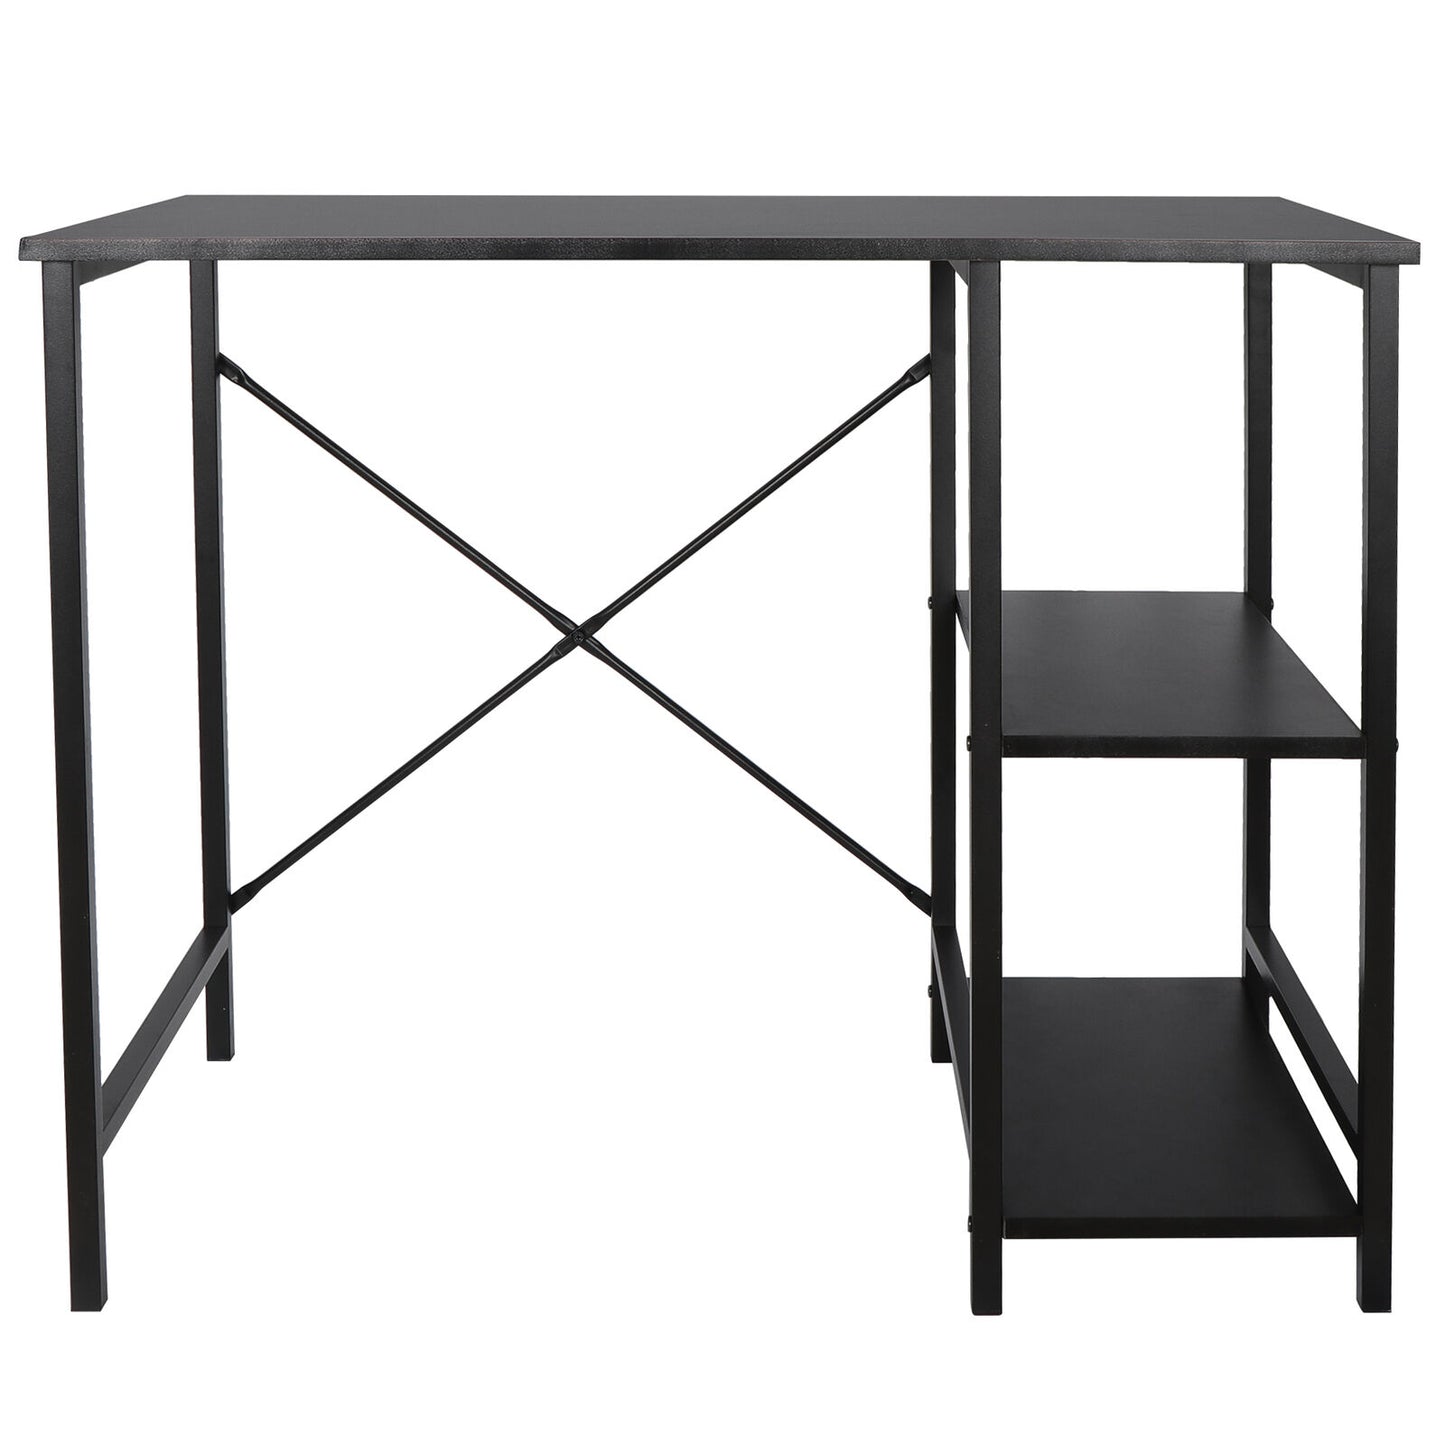 36"Modern Computer Desk Laptop Study Working Writing PC Table with 2 Tier Shelf